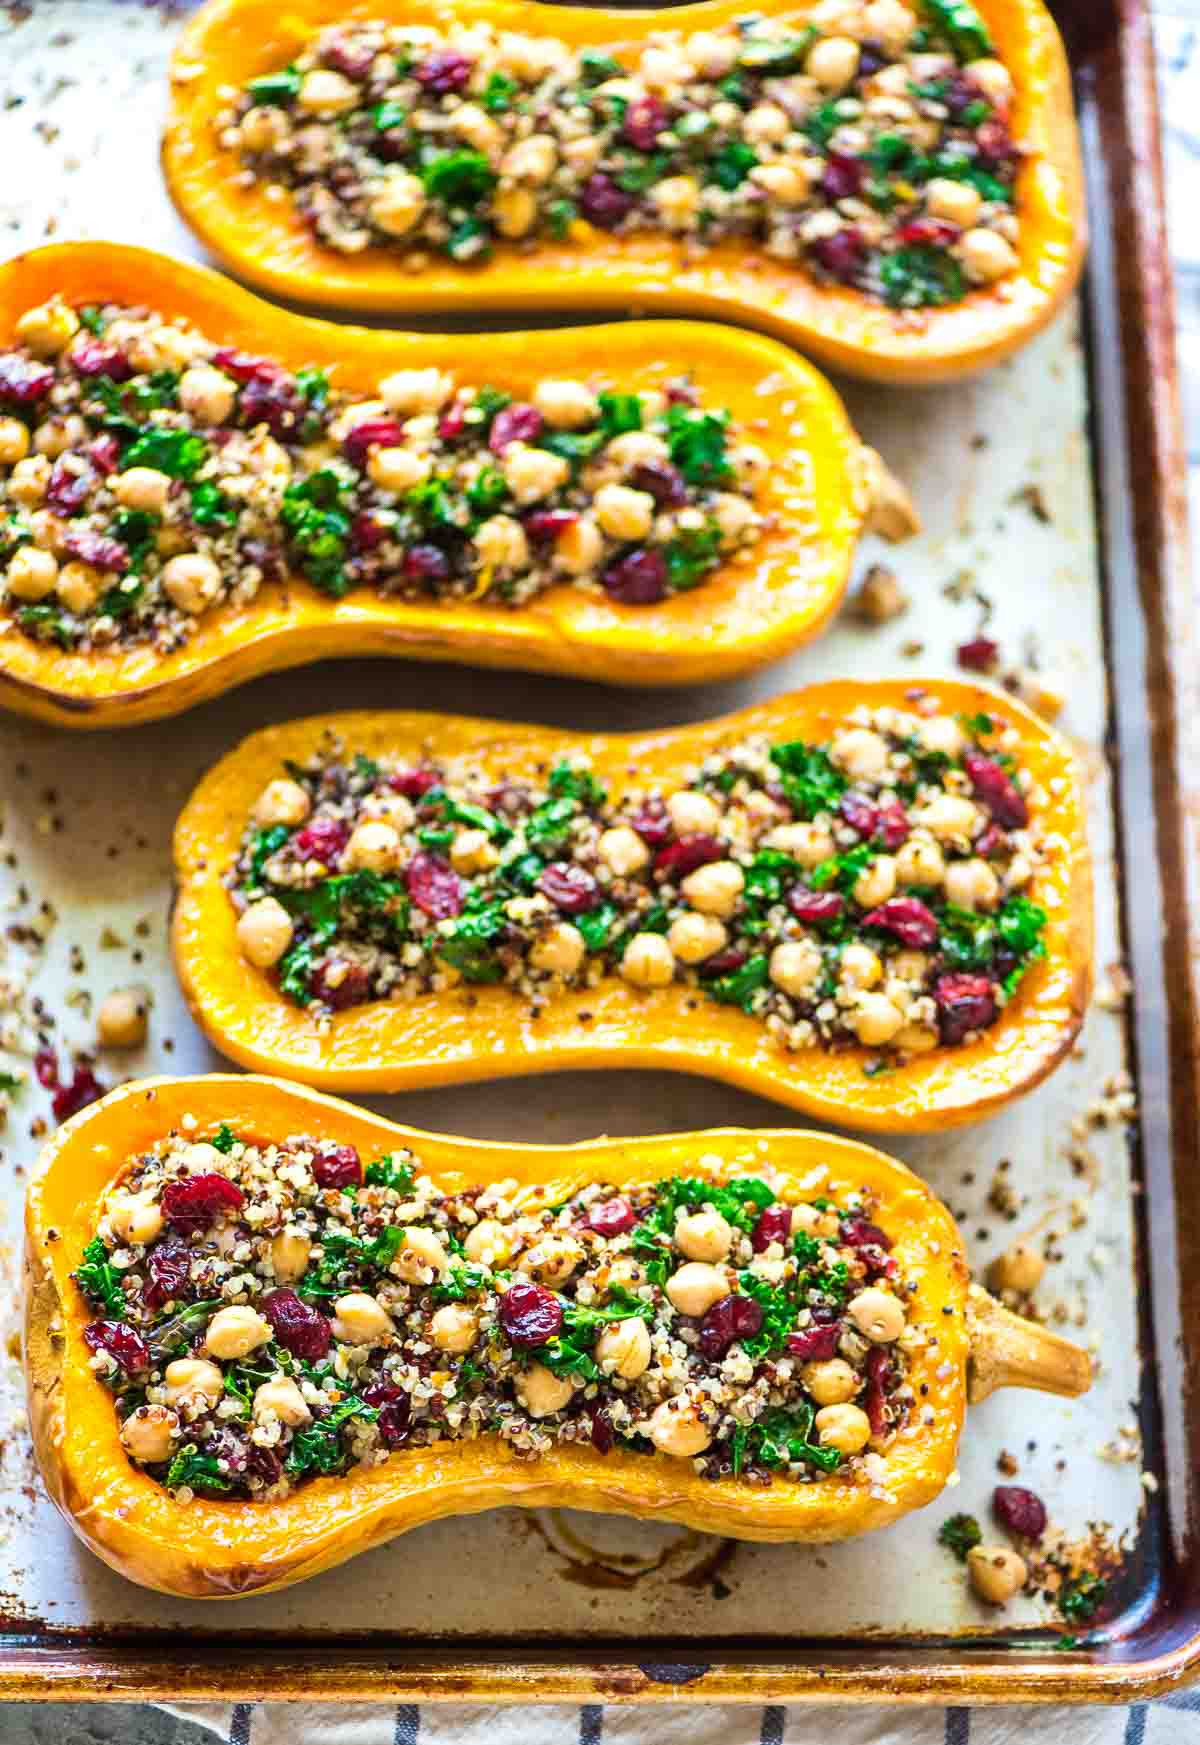 Vegetarian Easter Dinner
 Quinoa Stuffed Butternut Squash with Cranberries and Kale